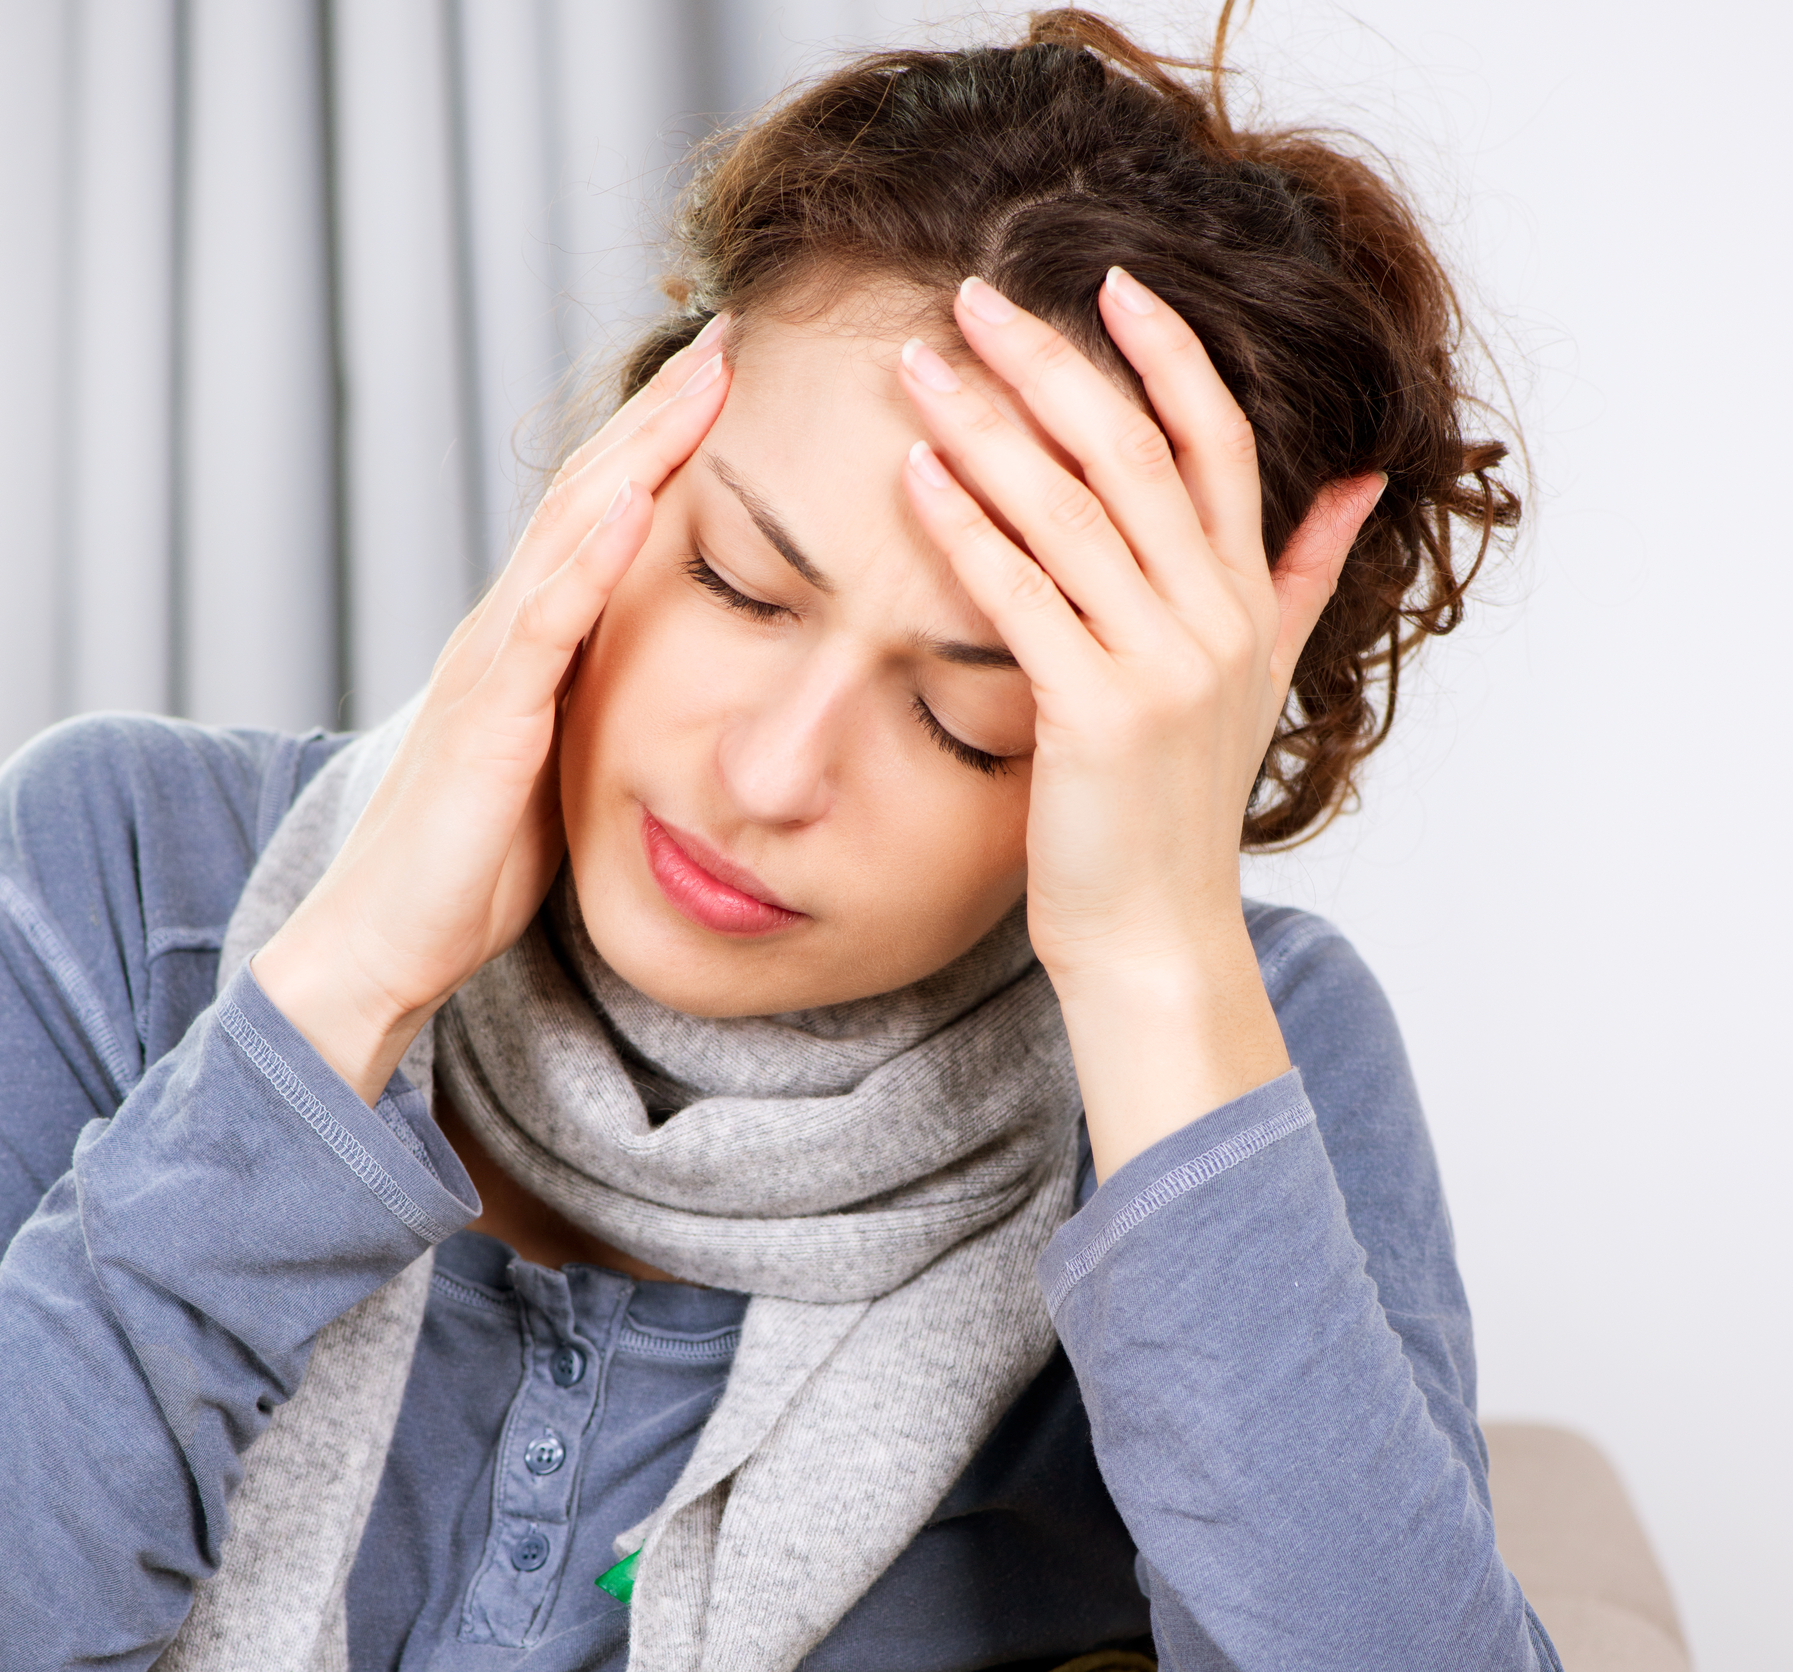 Doctor Explains Hot Water Migraine Trick To Get Rid Of Headaches Without Any Side Effects